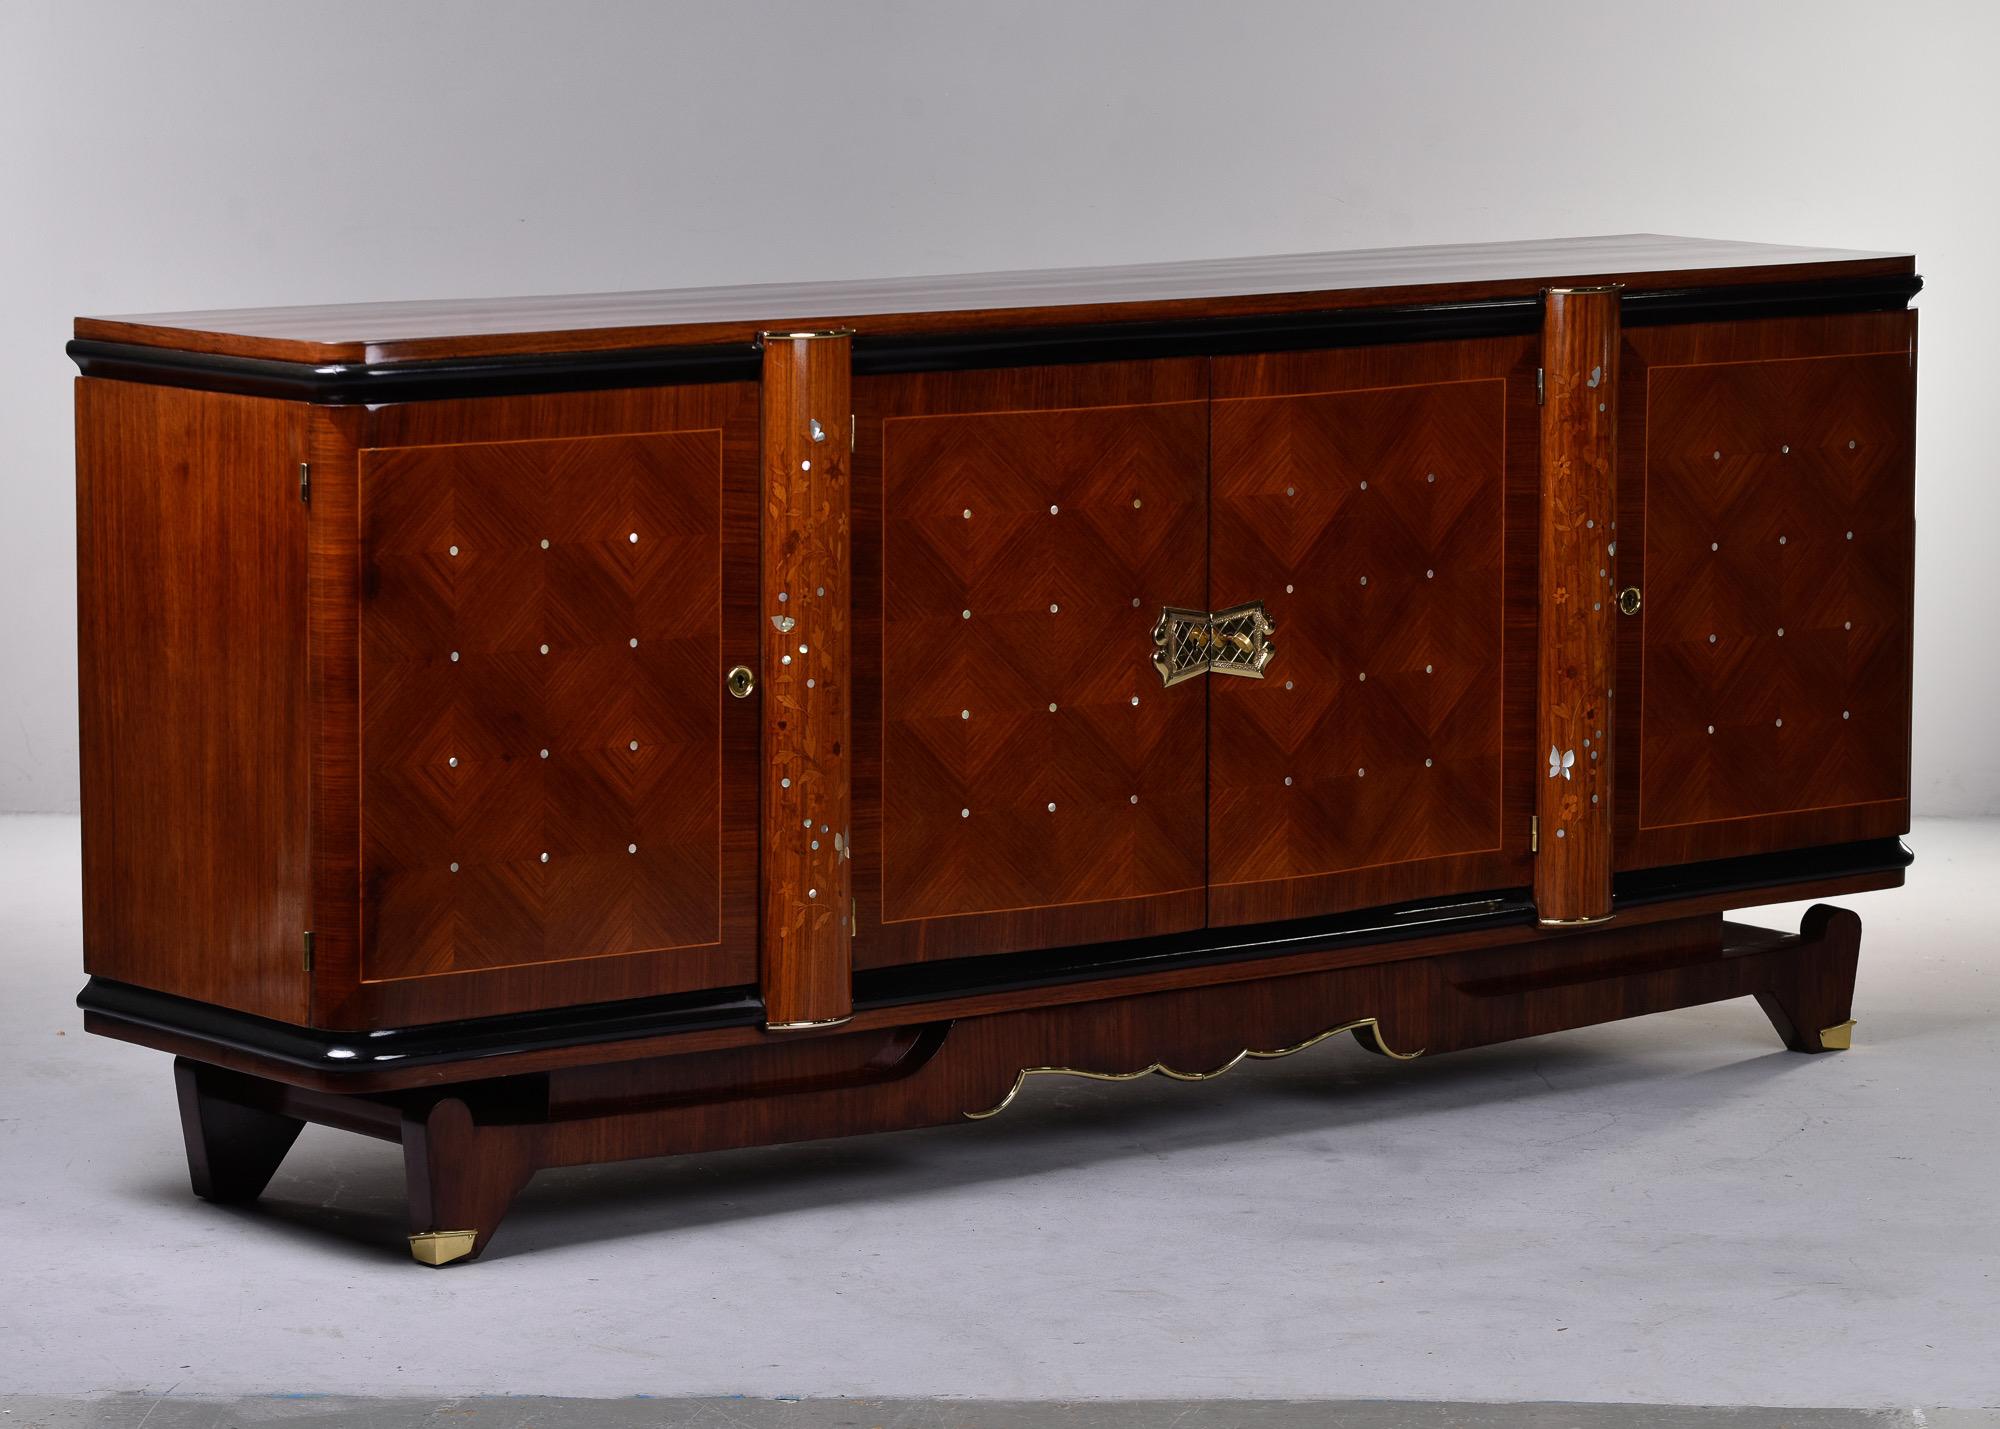 French Art Deco Palisandre Sideboard or Buffet with Mother of Pearl Inlay For Sale 4